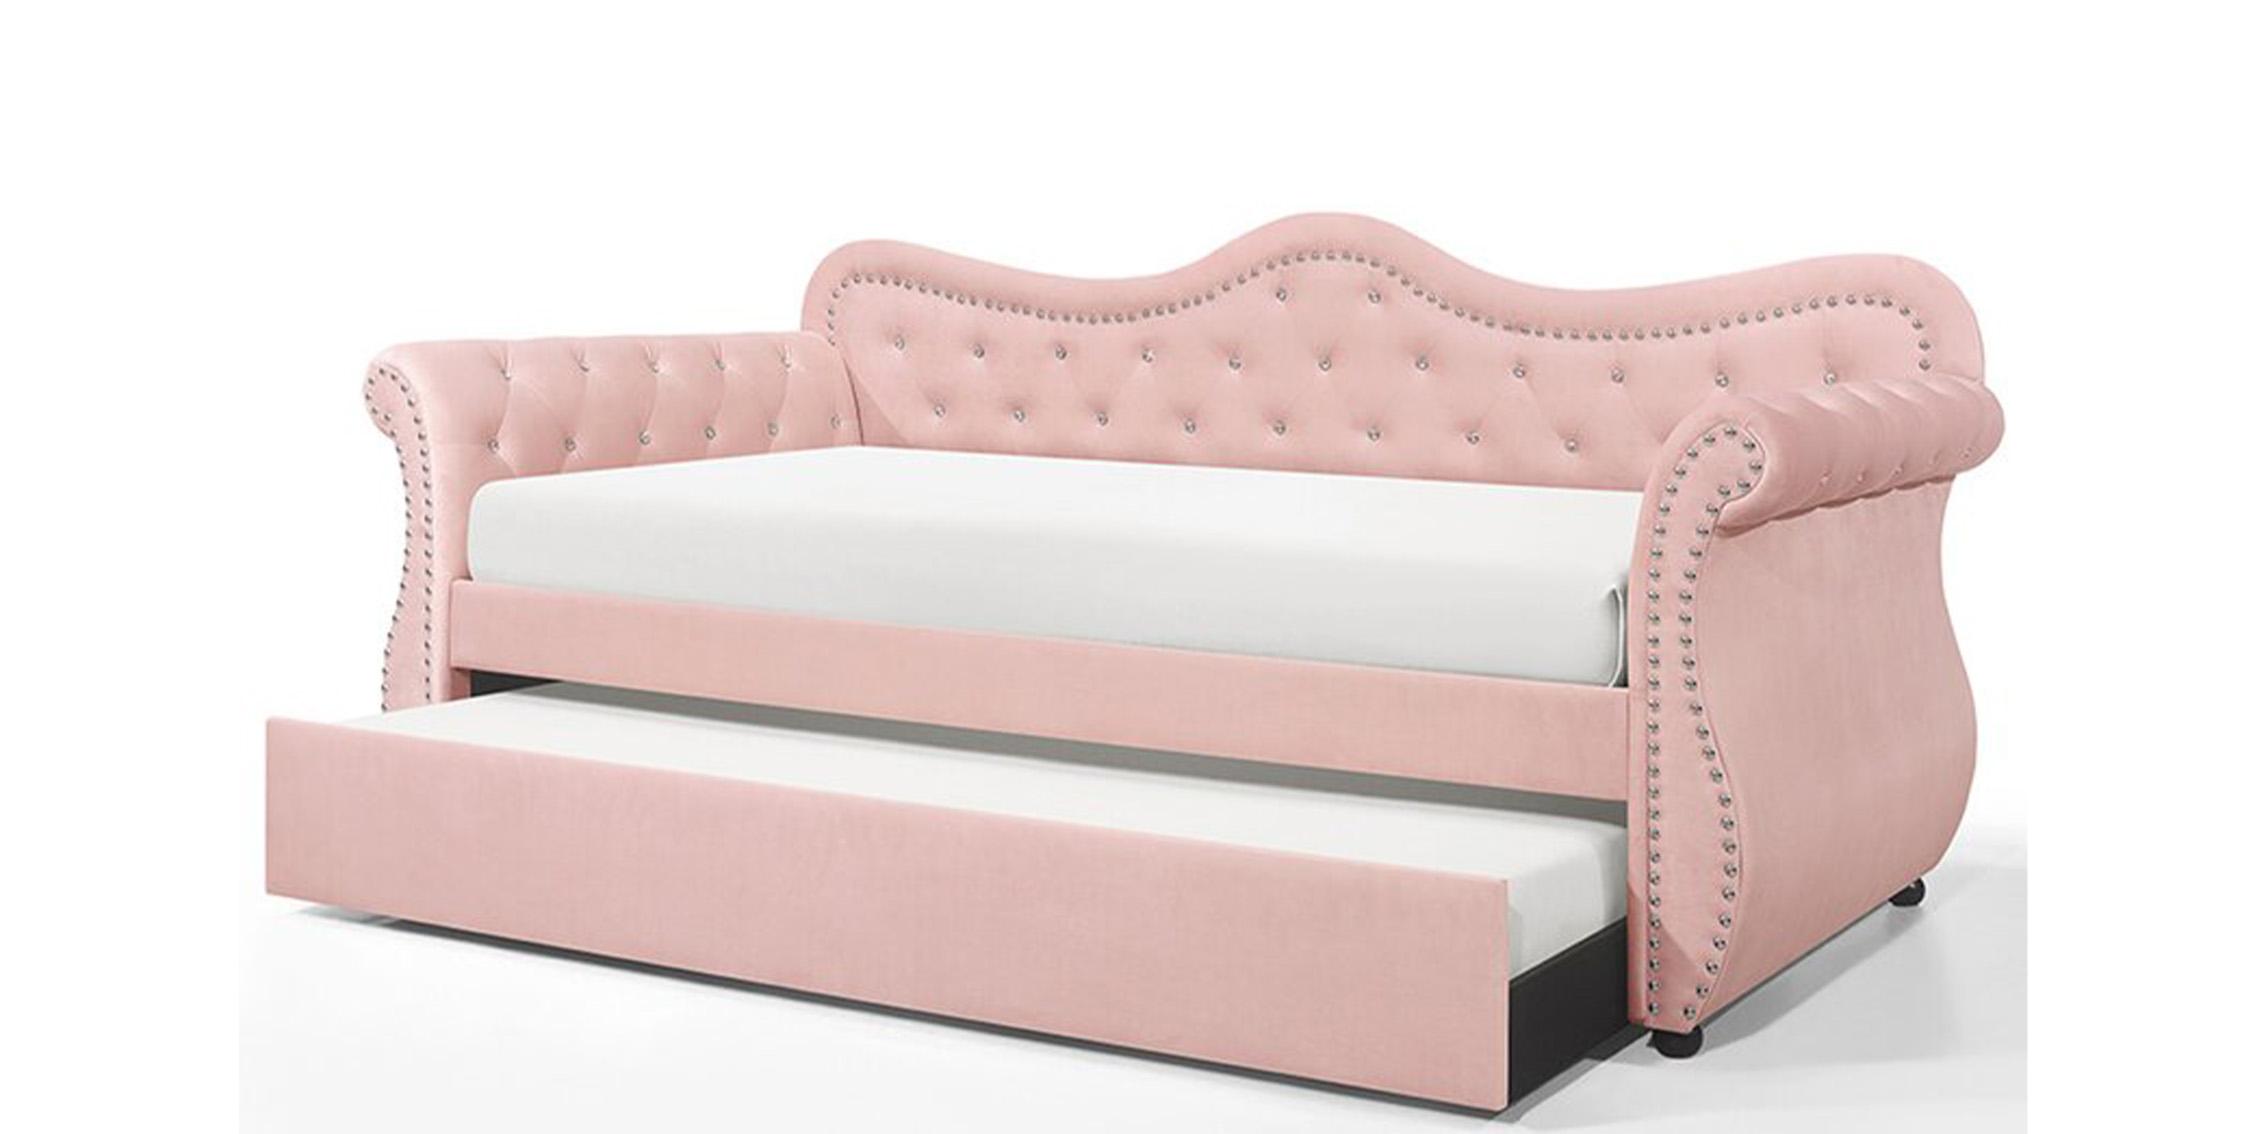 Contemporary, Modern Daybed Abby GHF-808857850904 in Pink Fabric